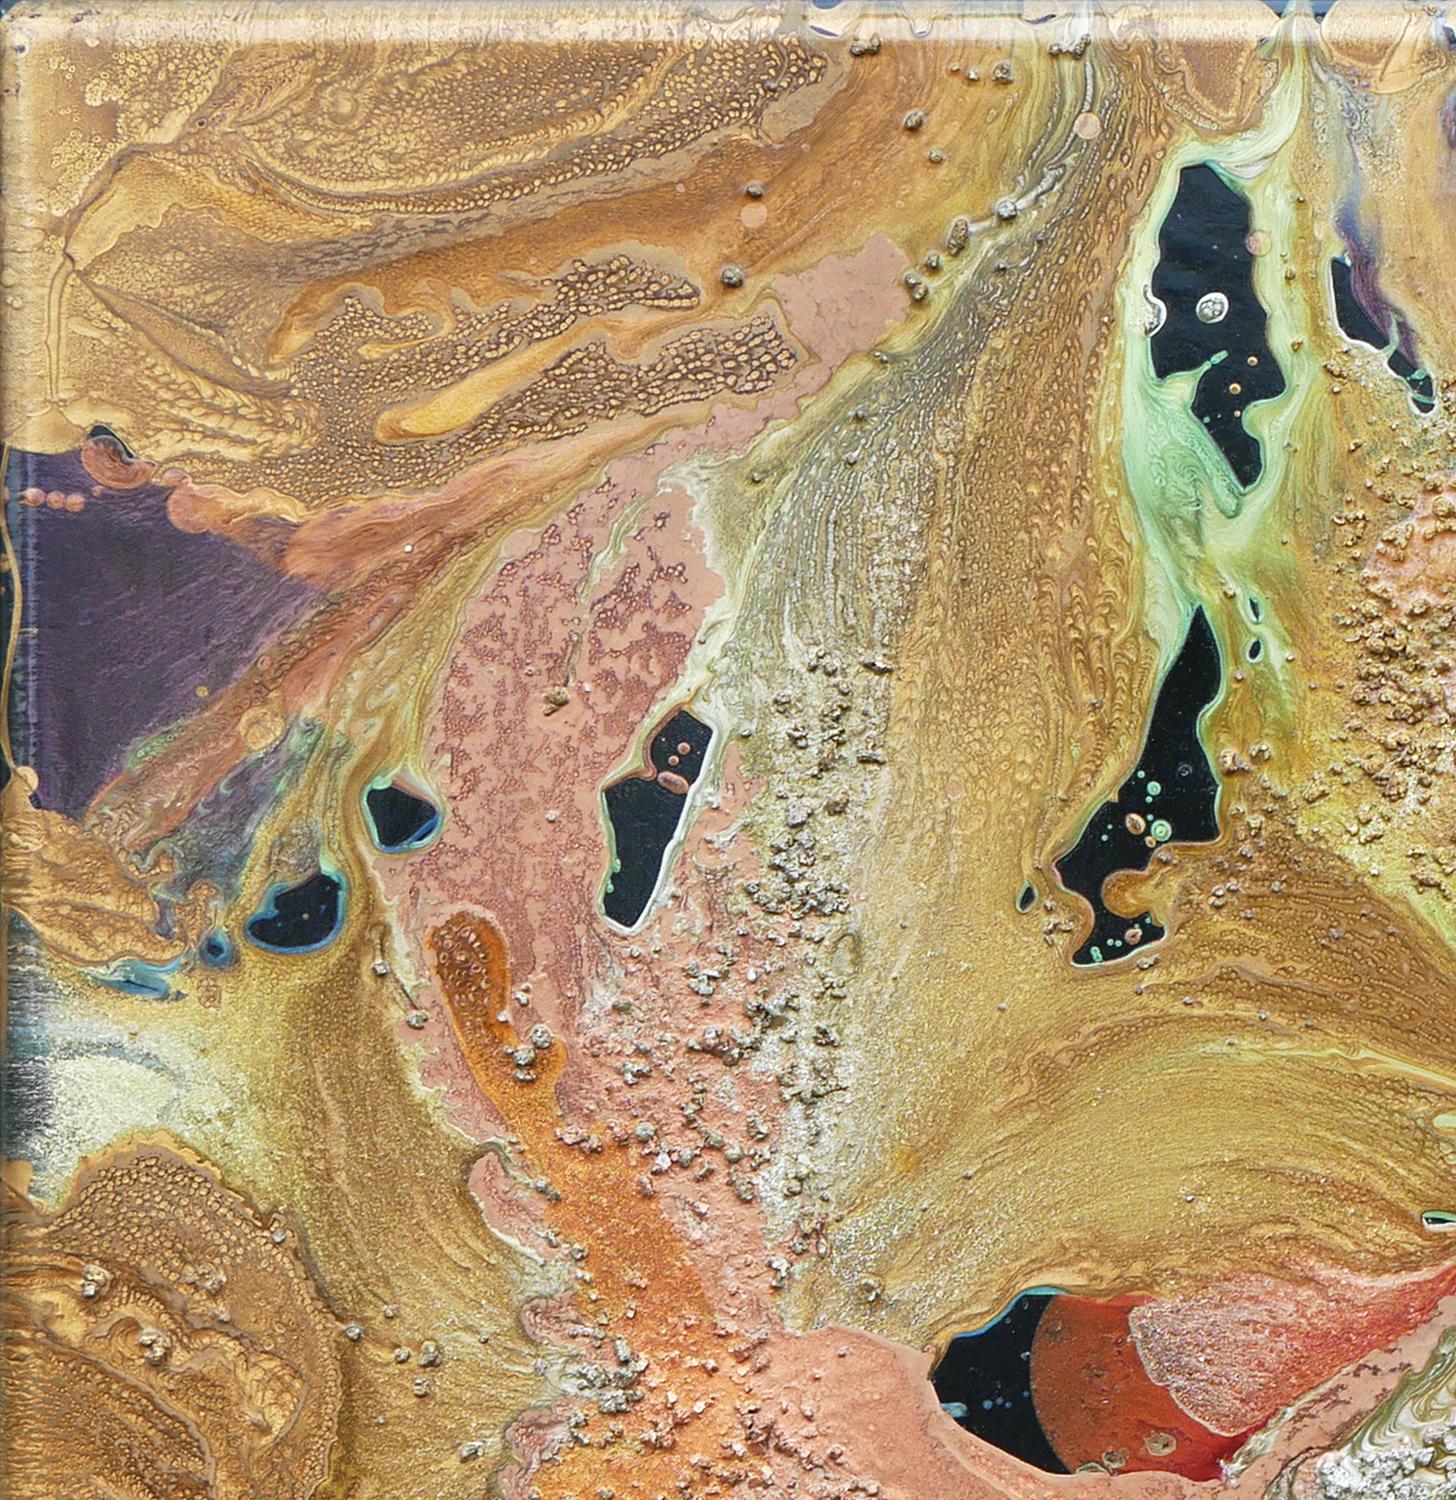 Gold, purple, and green abstract mixed-media painting by Hawaii-based artist, Èlan Vital. The piece depicts a deep, almost three-dimensional painting achieved through layers of pigments. Small stone-like details create texture throughout the